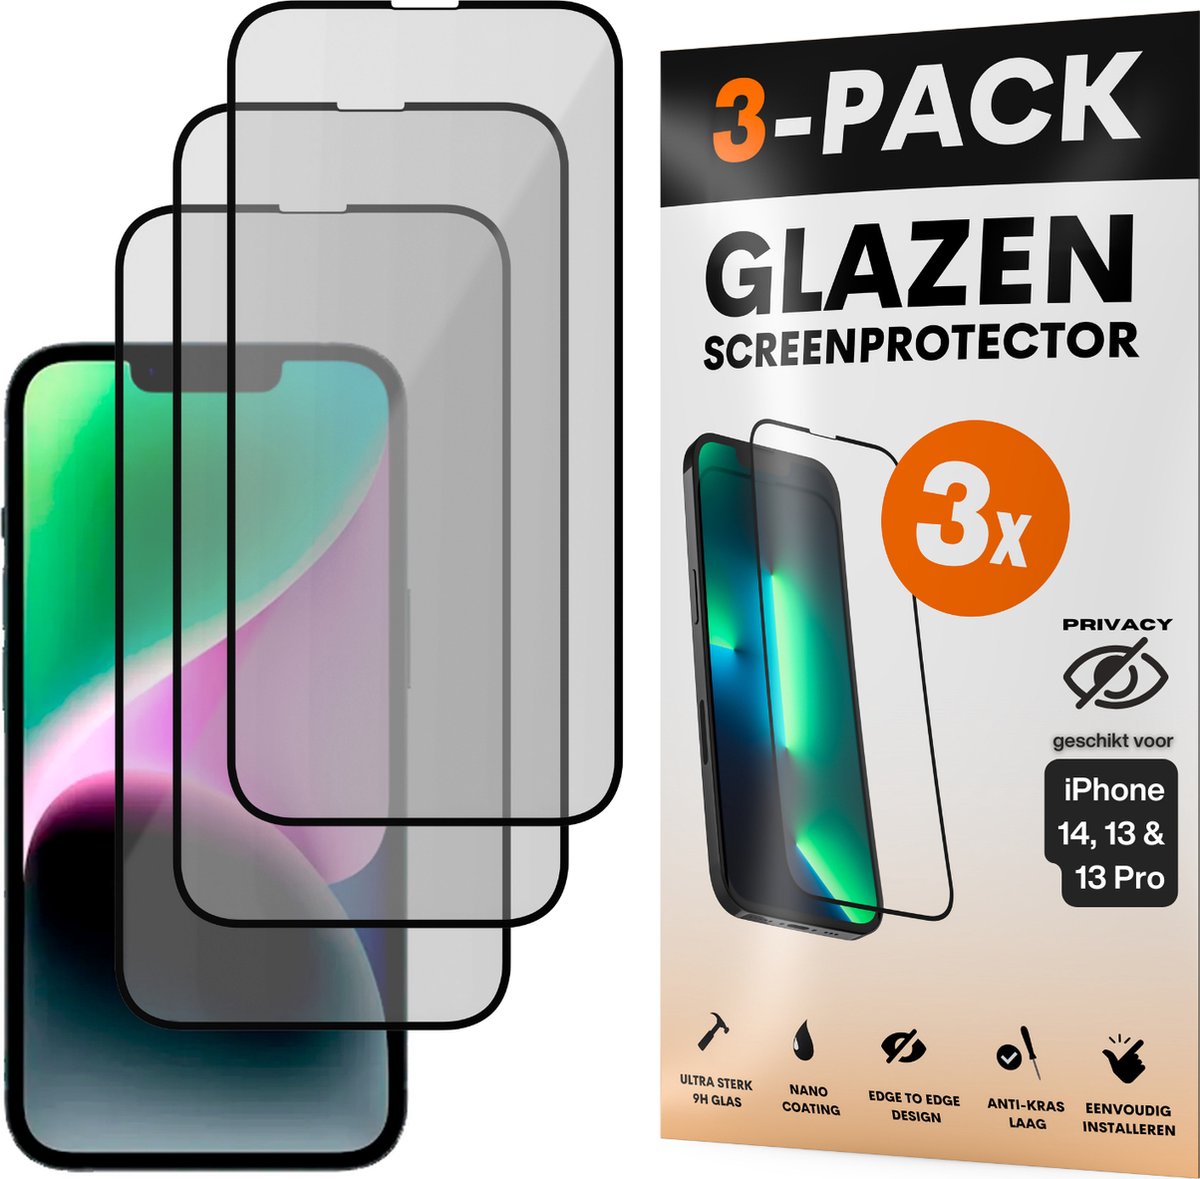 Privacy Screenprotector - Geschikt voor iPhone 14 / 13 / 13 Pro - Gehard Glas - Full Cover Tempered Privacy Glass - Case Friendly - 3 Pack